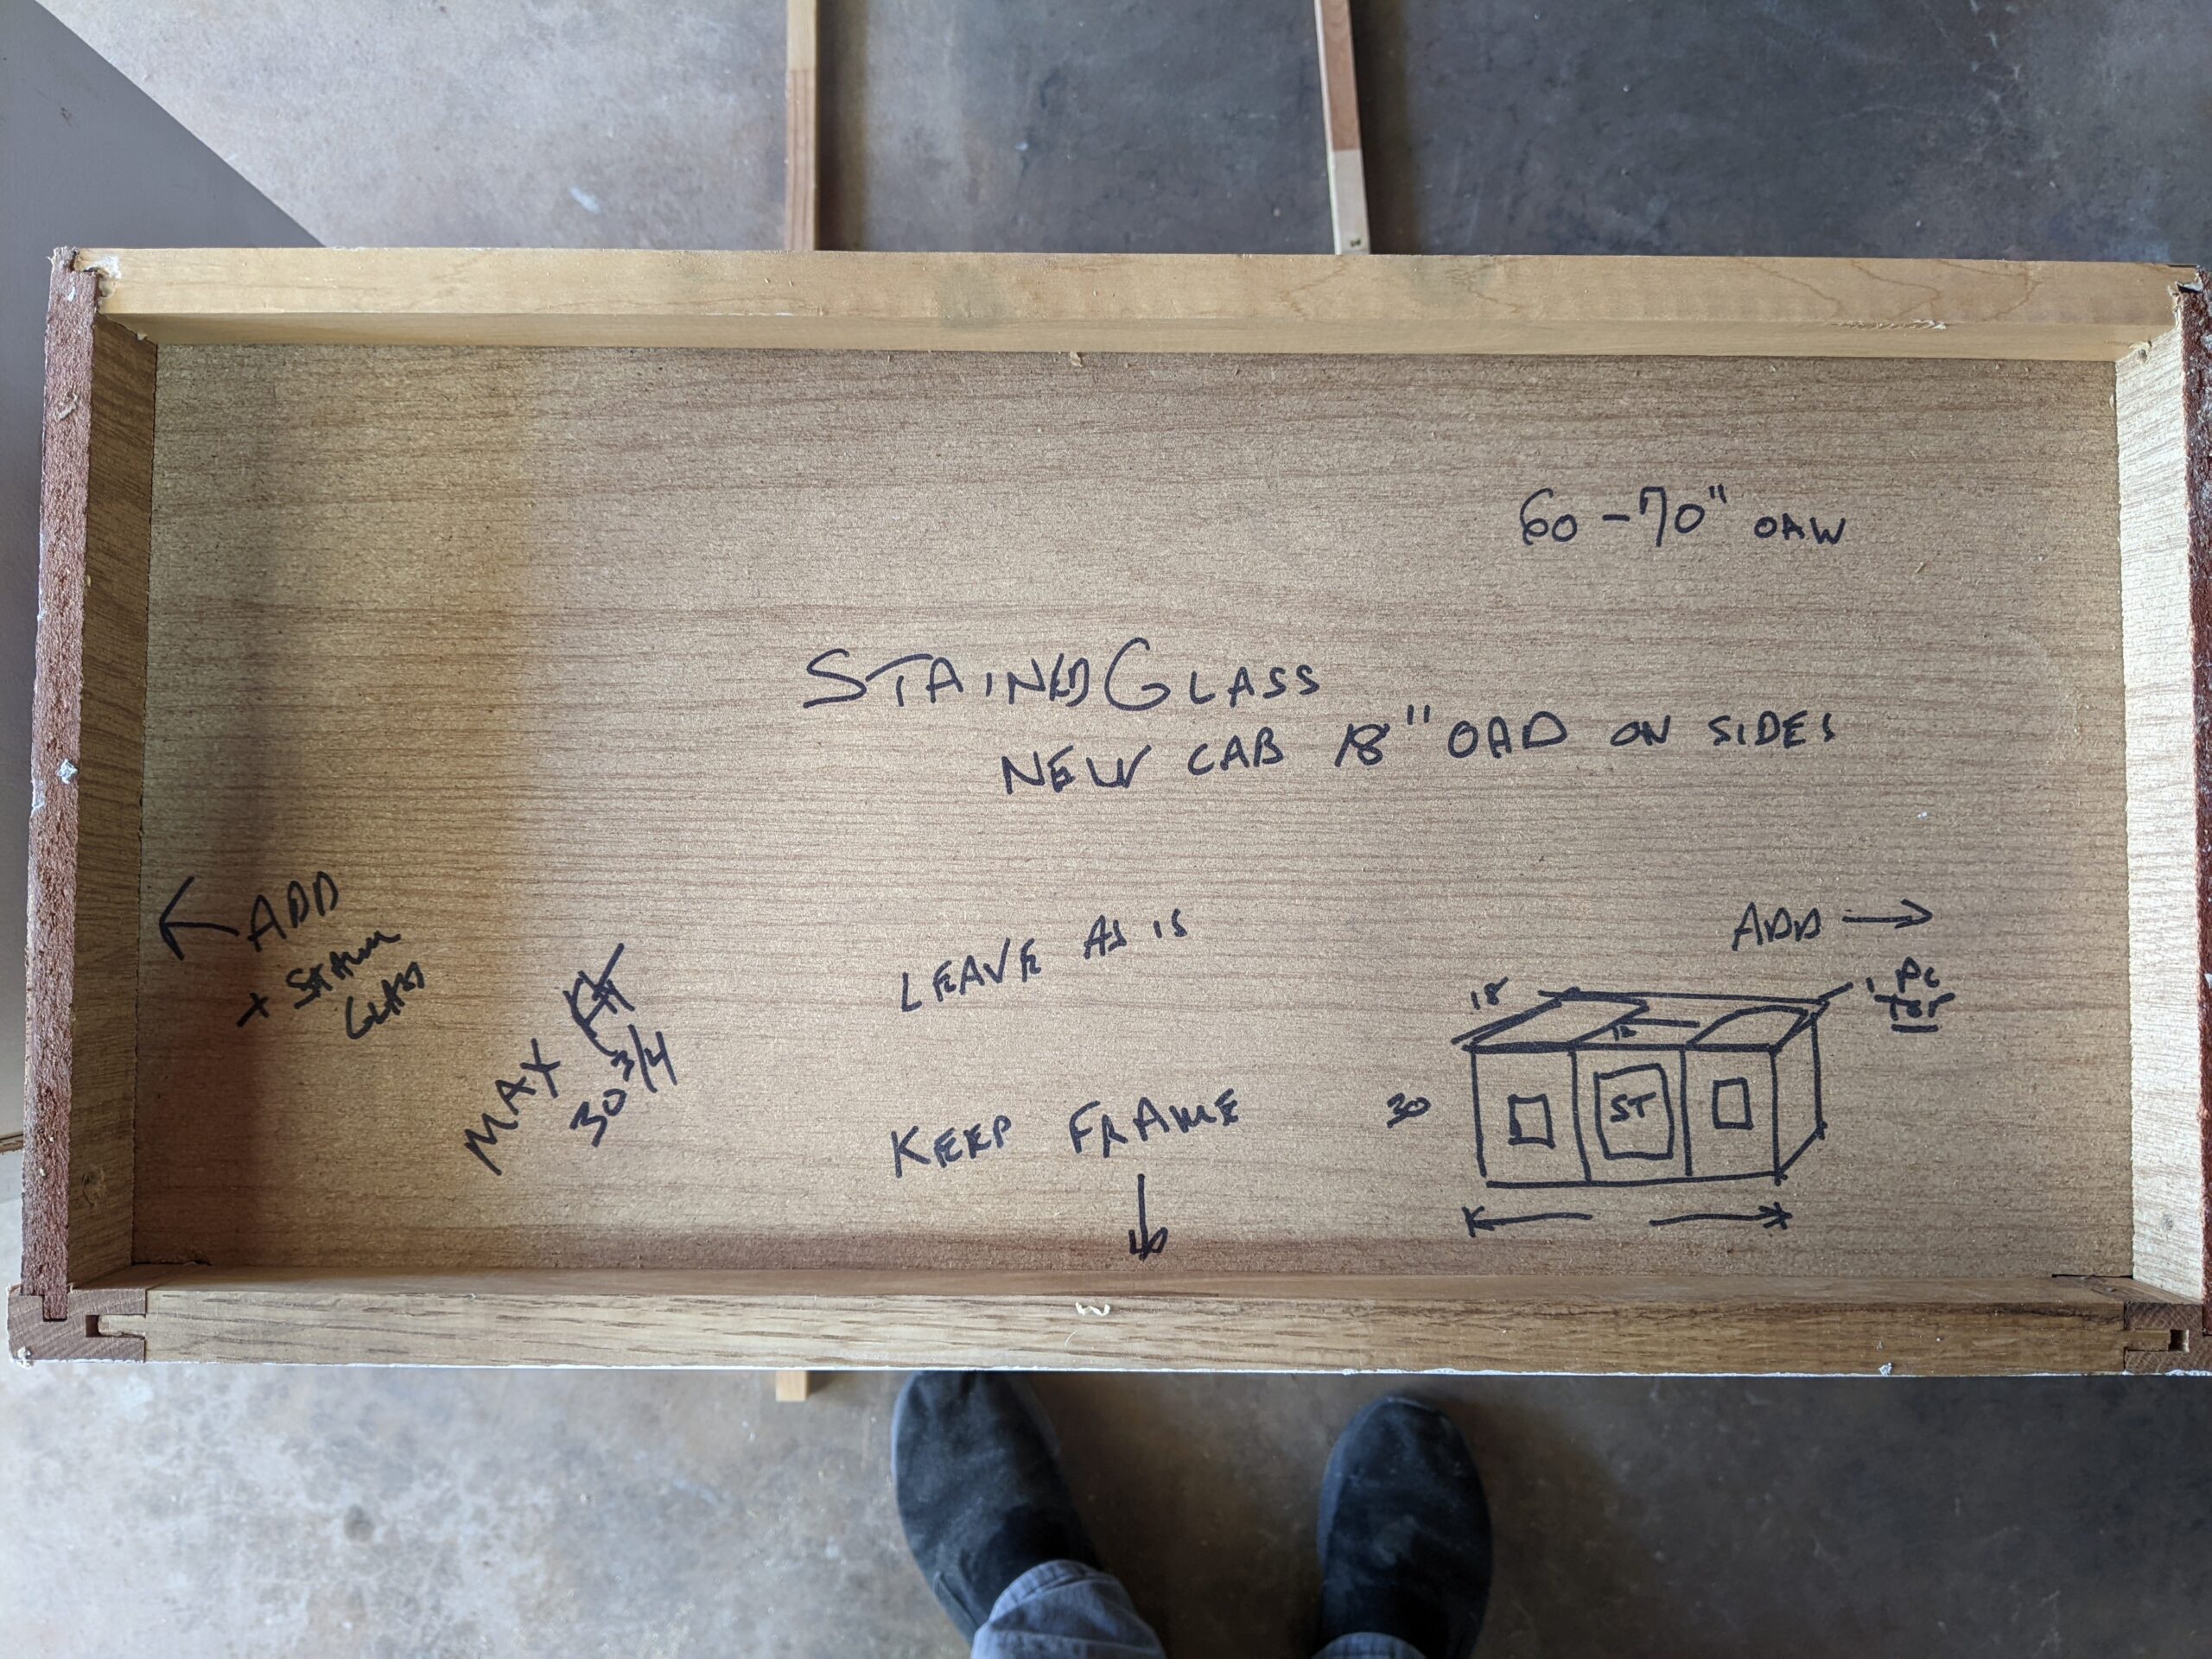 Detailed instructions on top of the center cabinet, which was removed intact.